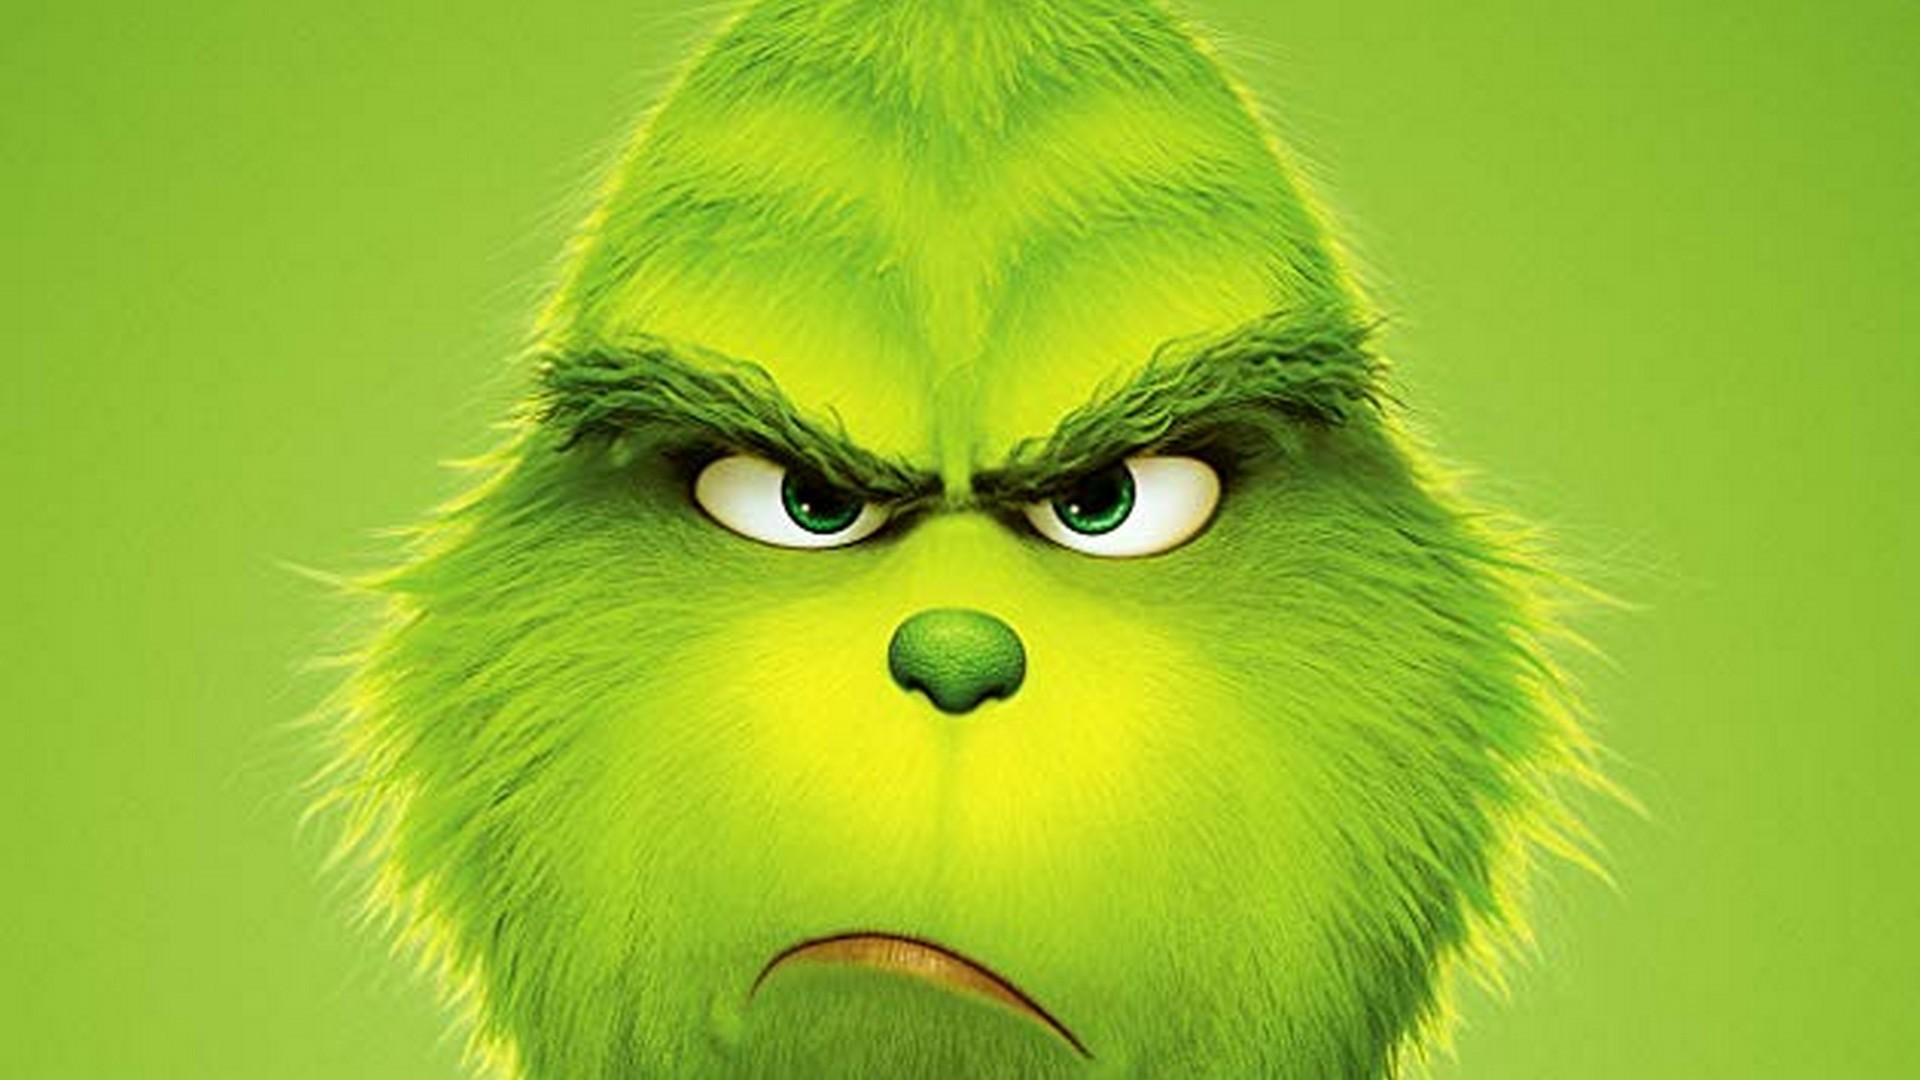 Free download The Grinchjpg 3404x1258 for your Desktop Mobile  Tablet   Explore 42 The Grinch Wallpaper Desktop  The Grinch Wallpaper Grinch  Desktop Wallpaper Grinch Wallpaper